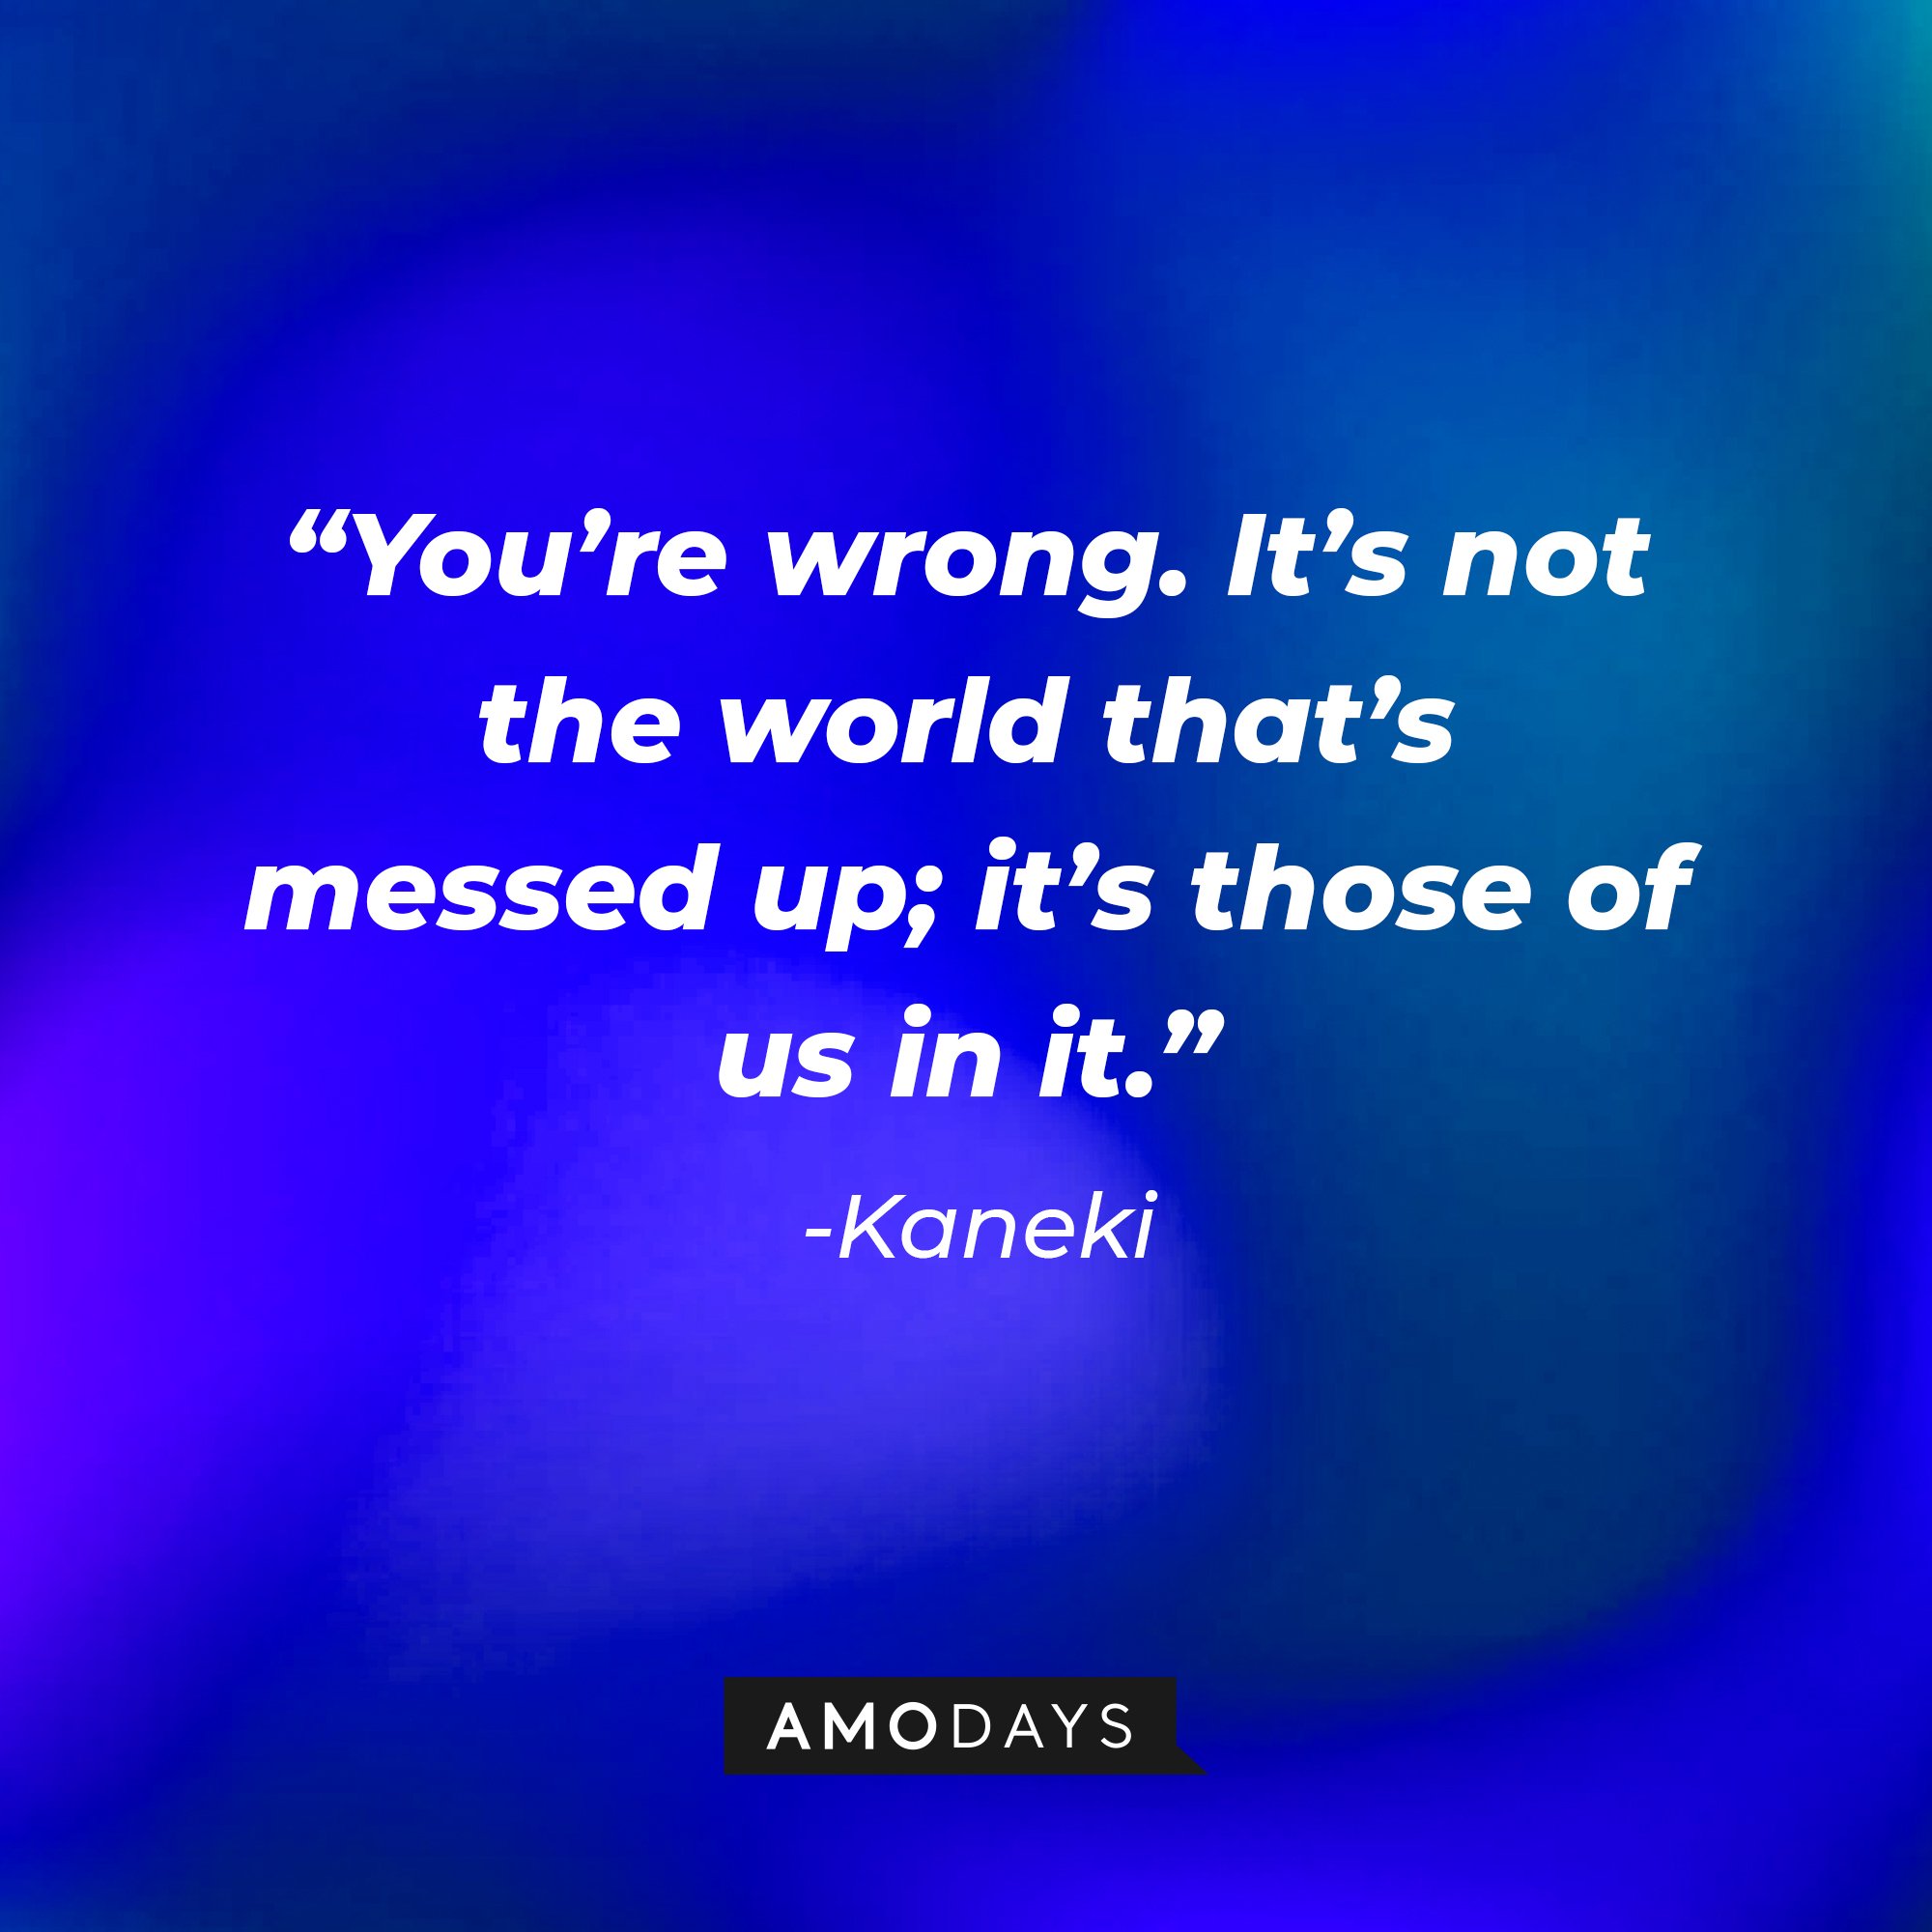   Kaneki's quote: “You’re wrong. It’s not the world that’s messed up; it’s those of us in it.” | Image AmoDays